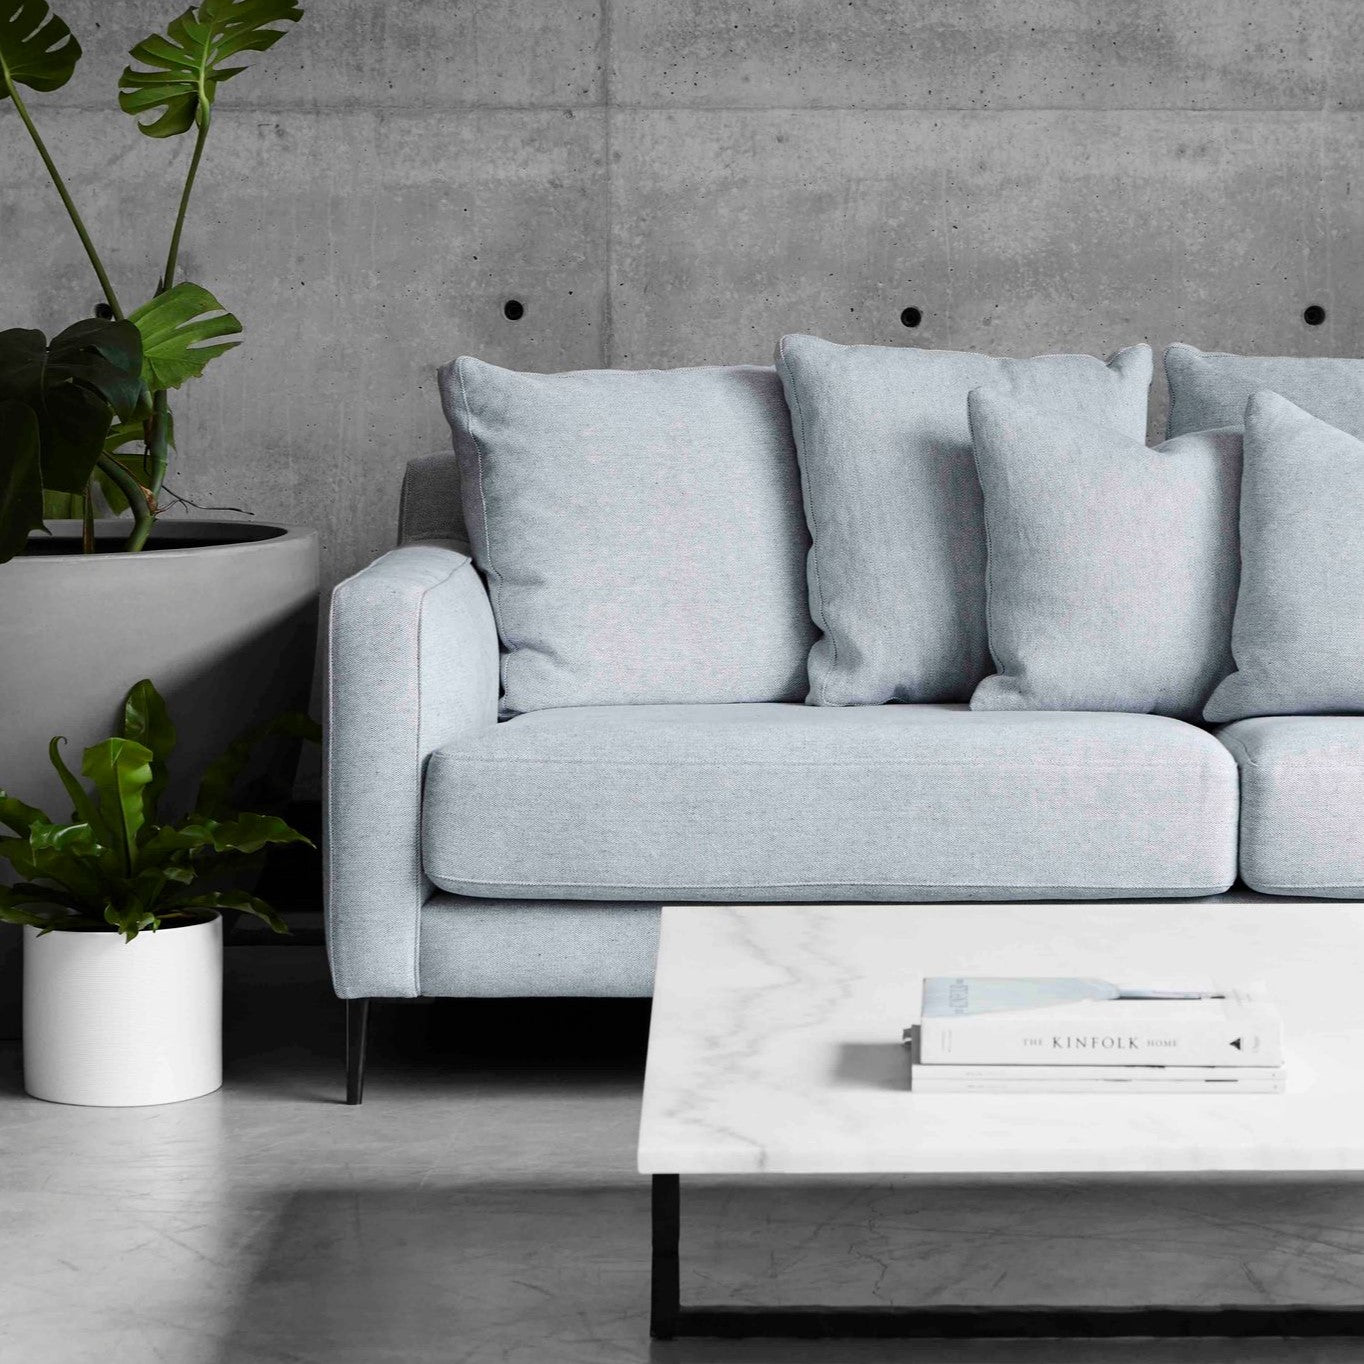 Parker Sofa by Molmic available from Make Your House A Home, Furniture Store located in Bendigo, Victoria. Australian Made in Melbourne.